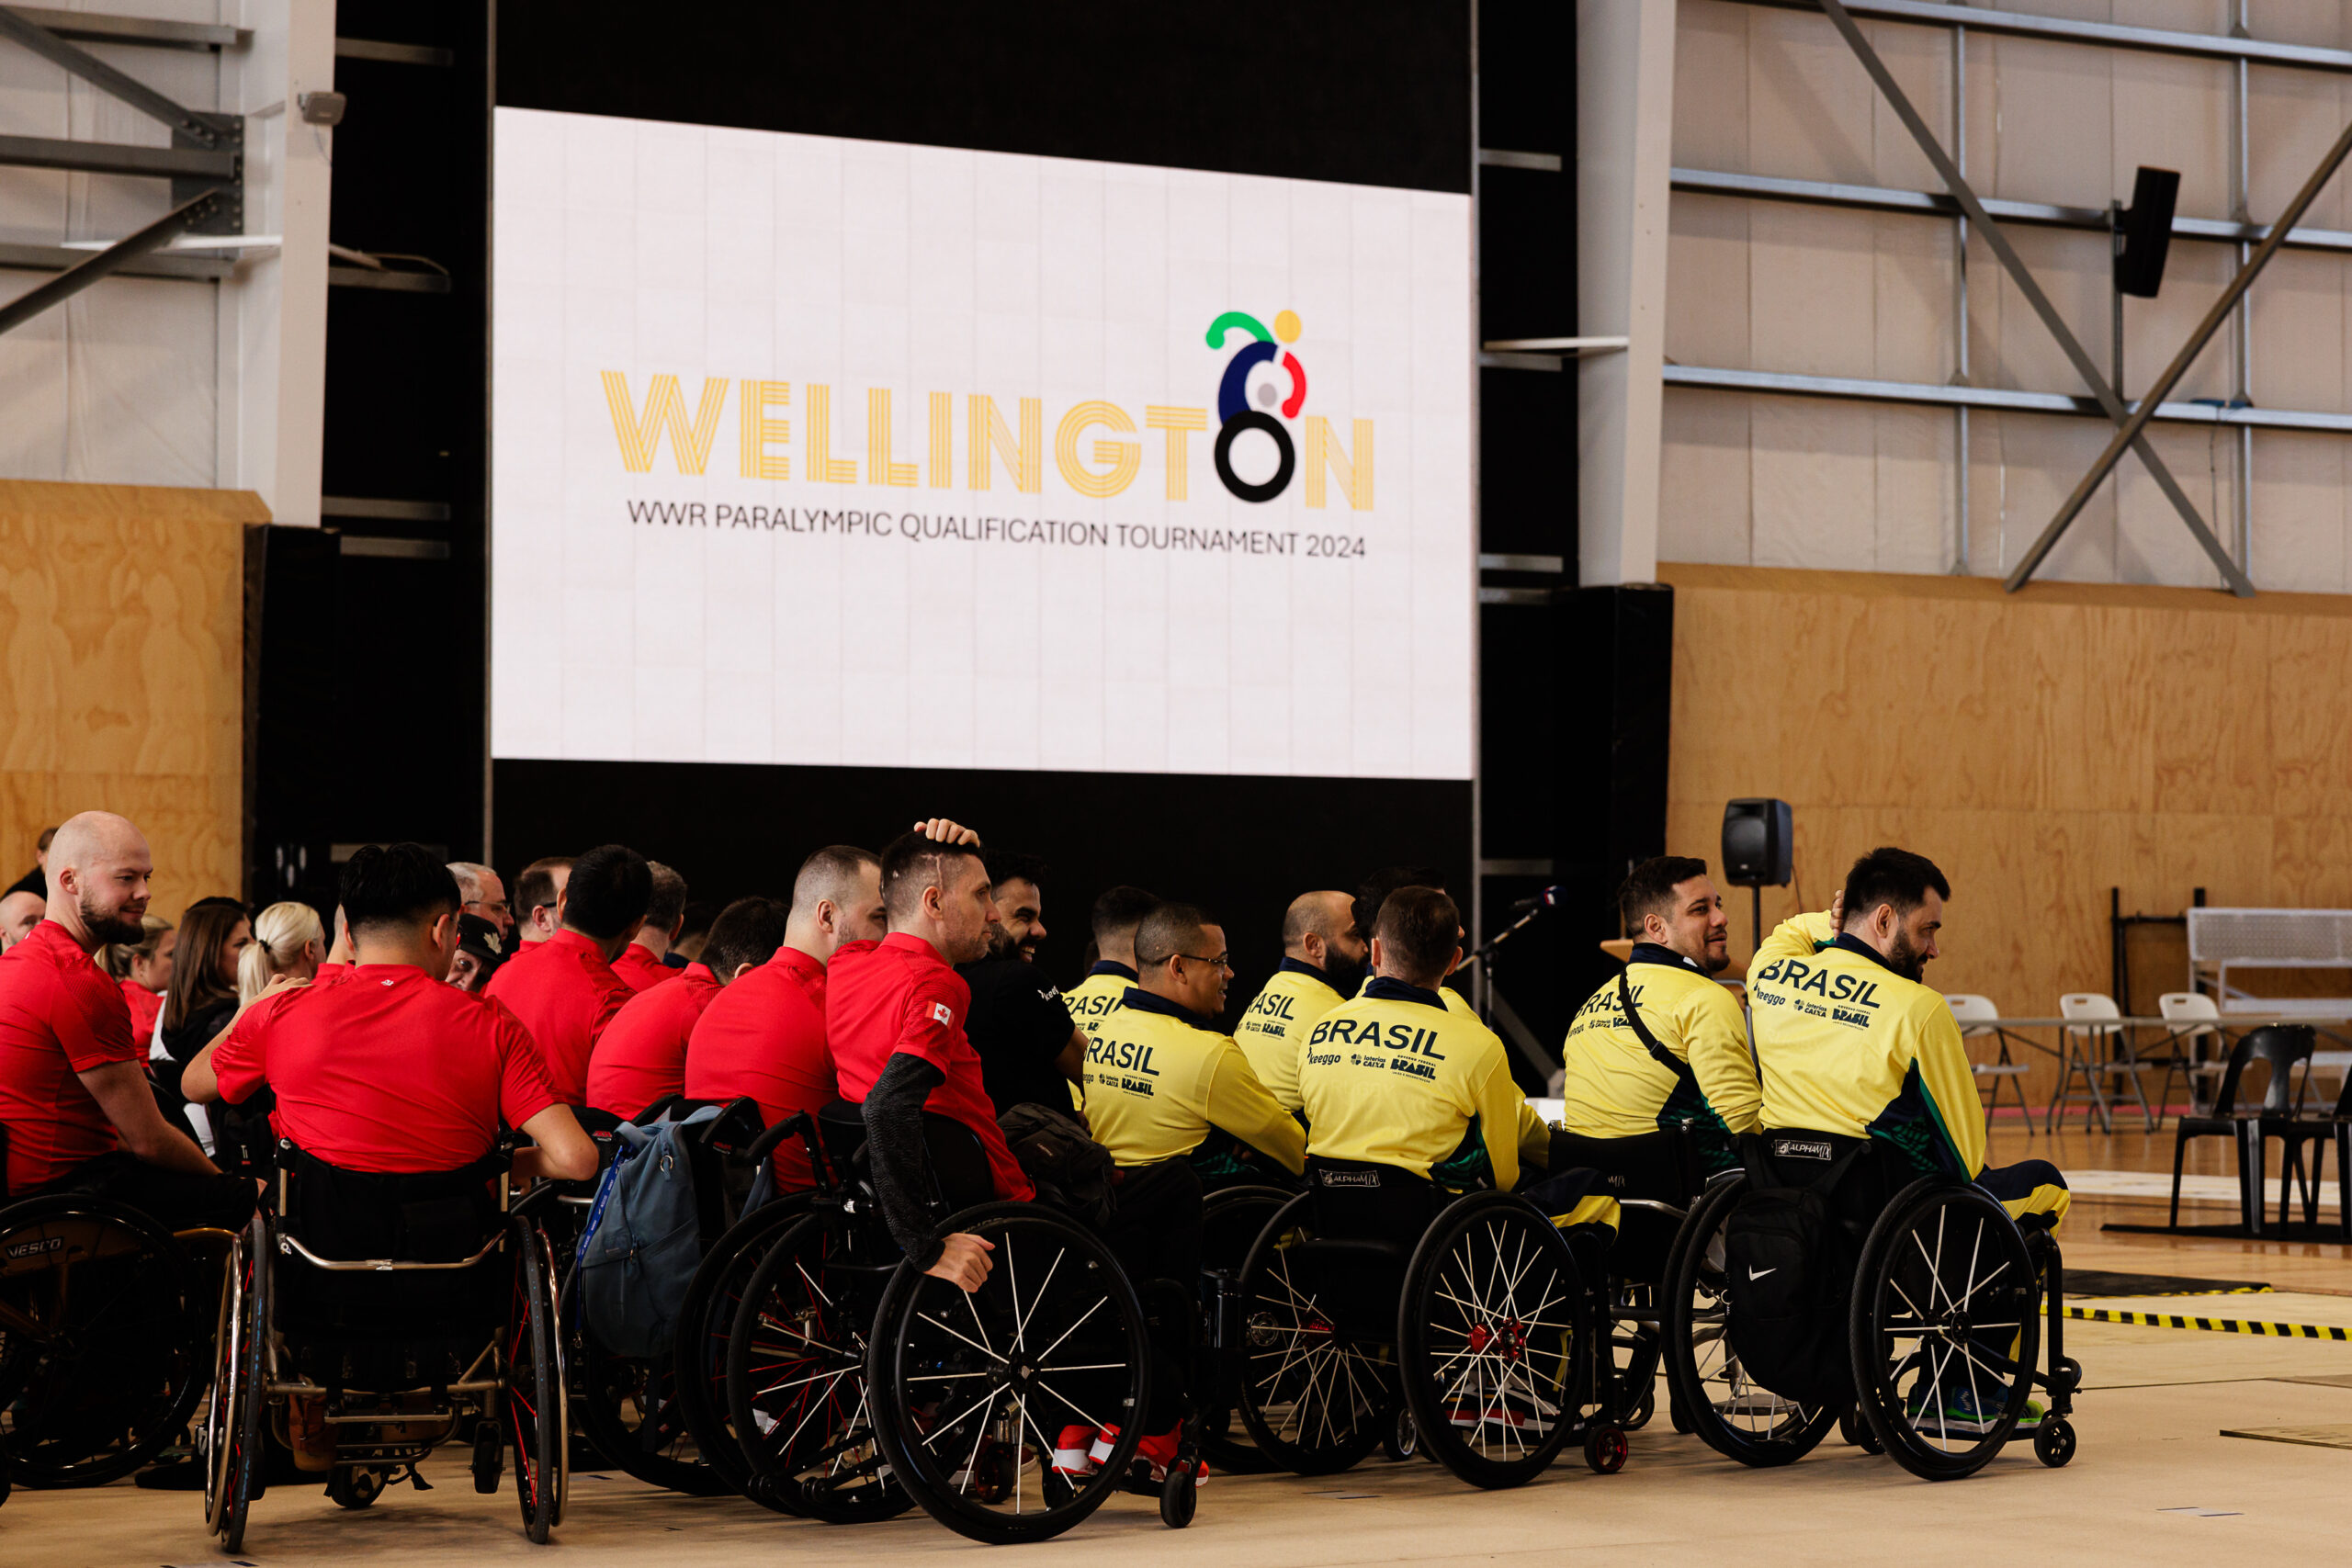 Australia, Canada and Germany Qualify for the 2024 Paris Paralympic Games!